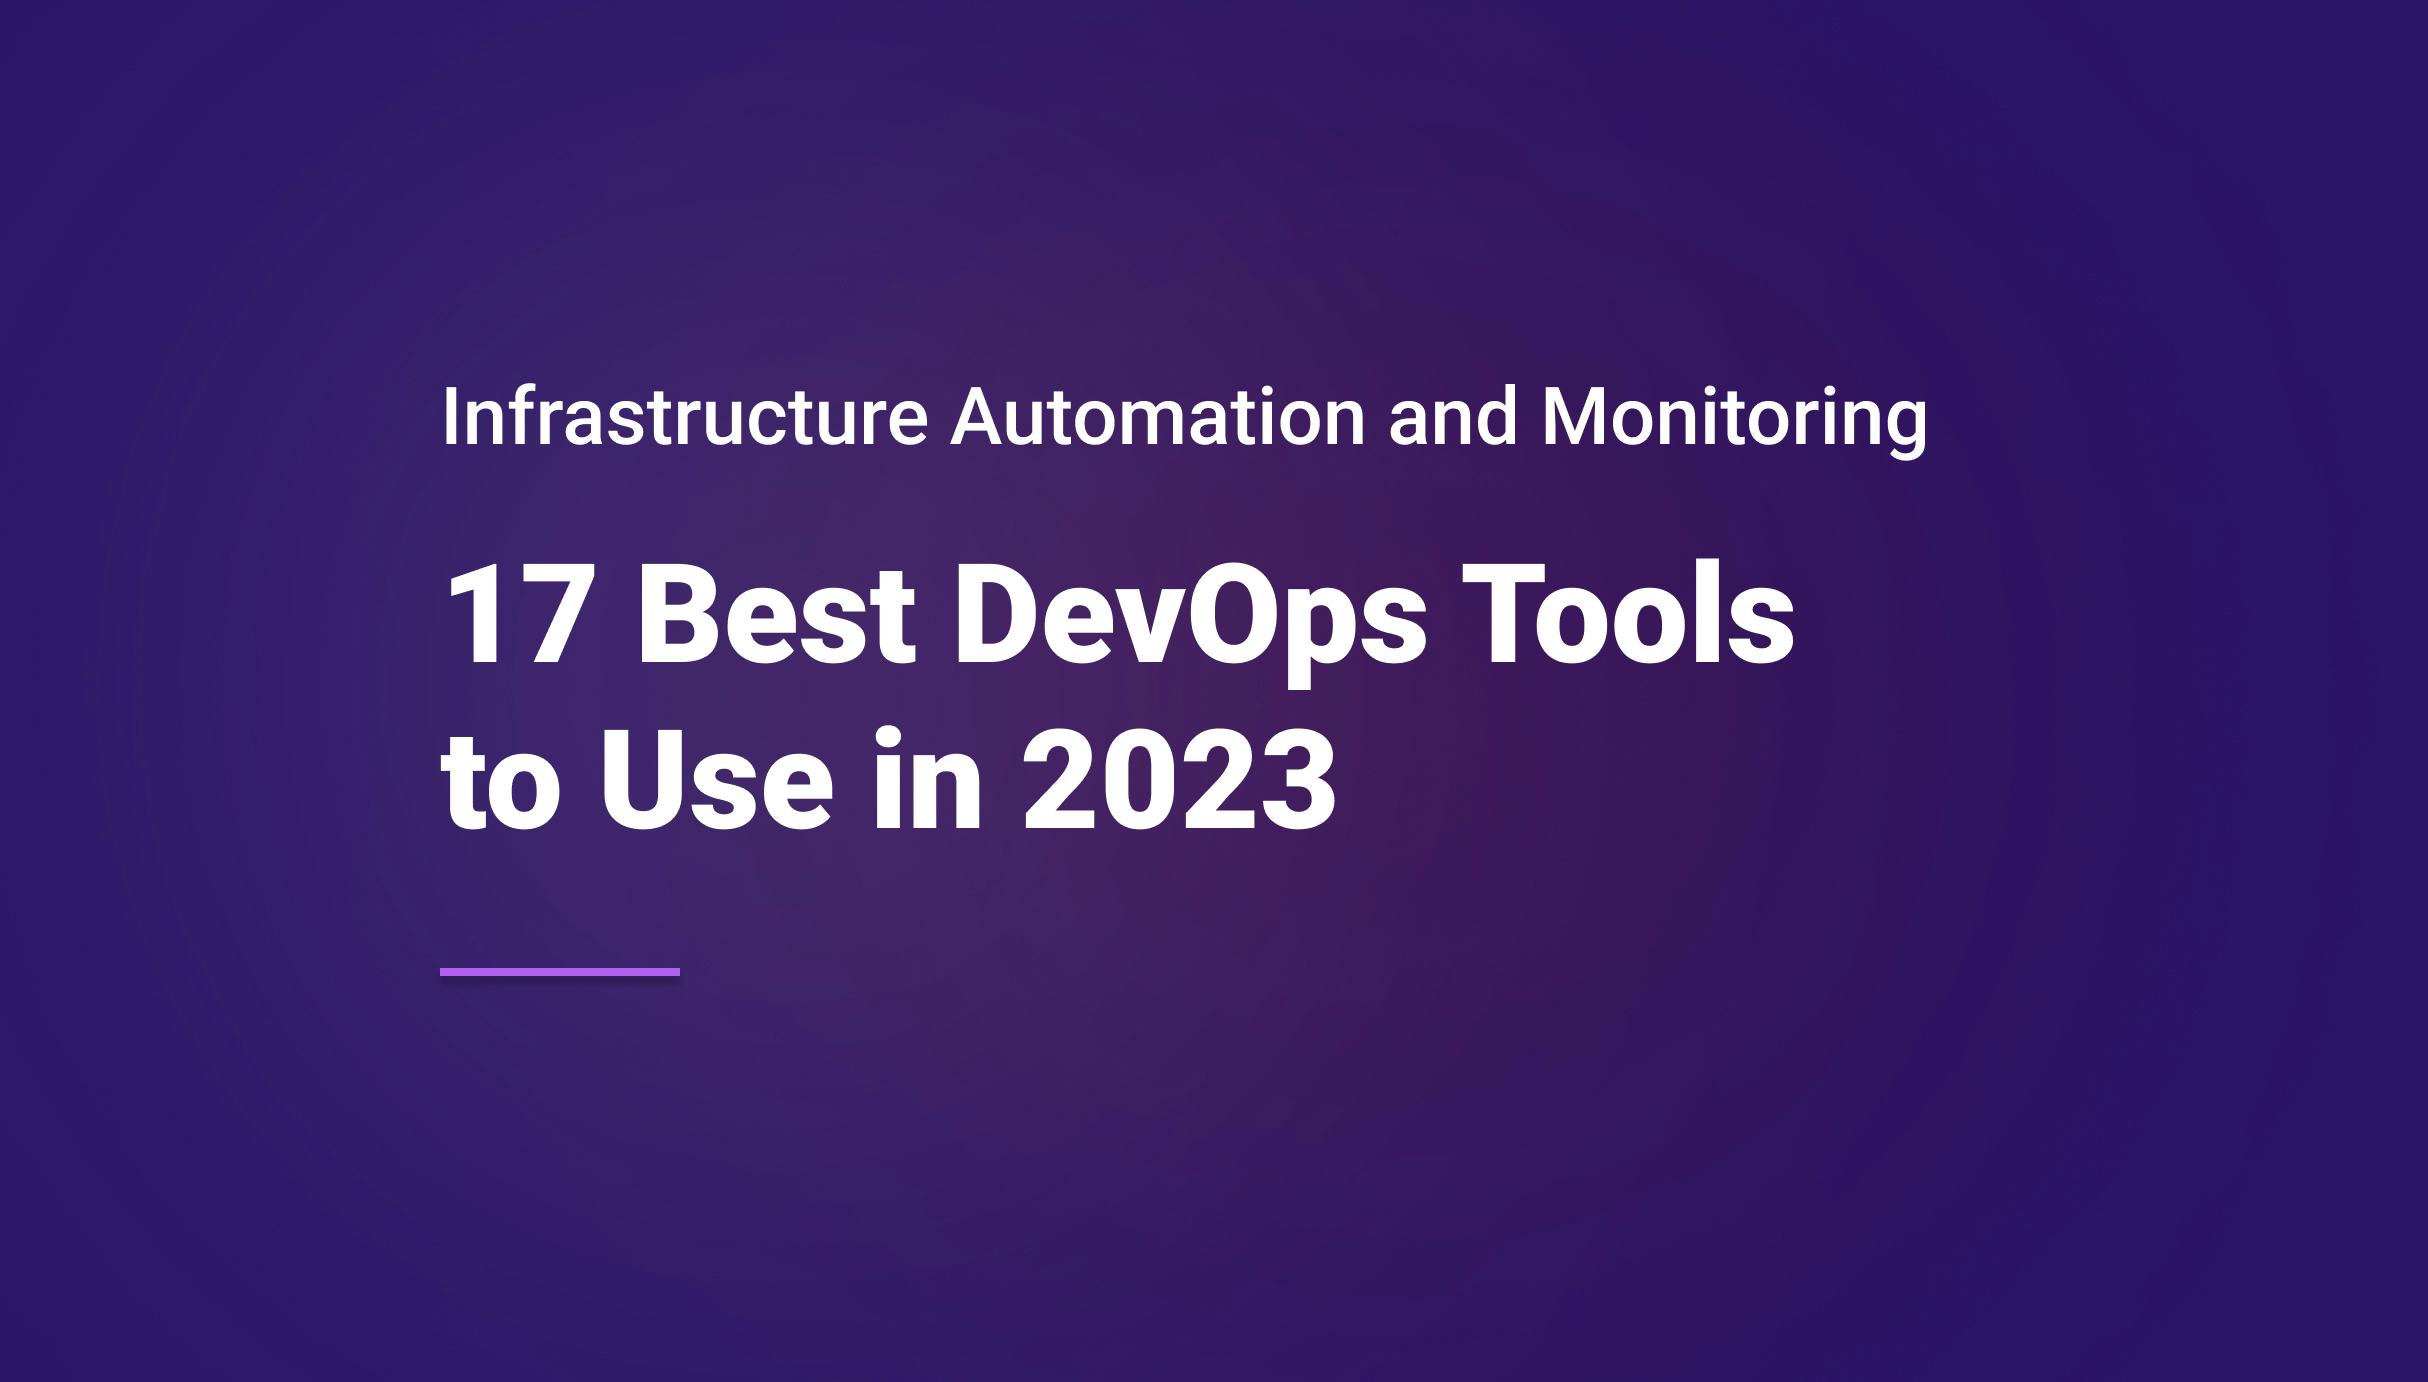 17 Best DevOps Tools to Use in 2023 for Infrastructure Automation and Monitoring - Qovery